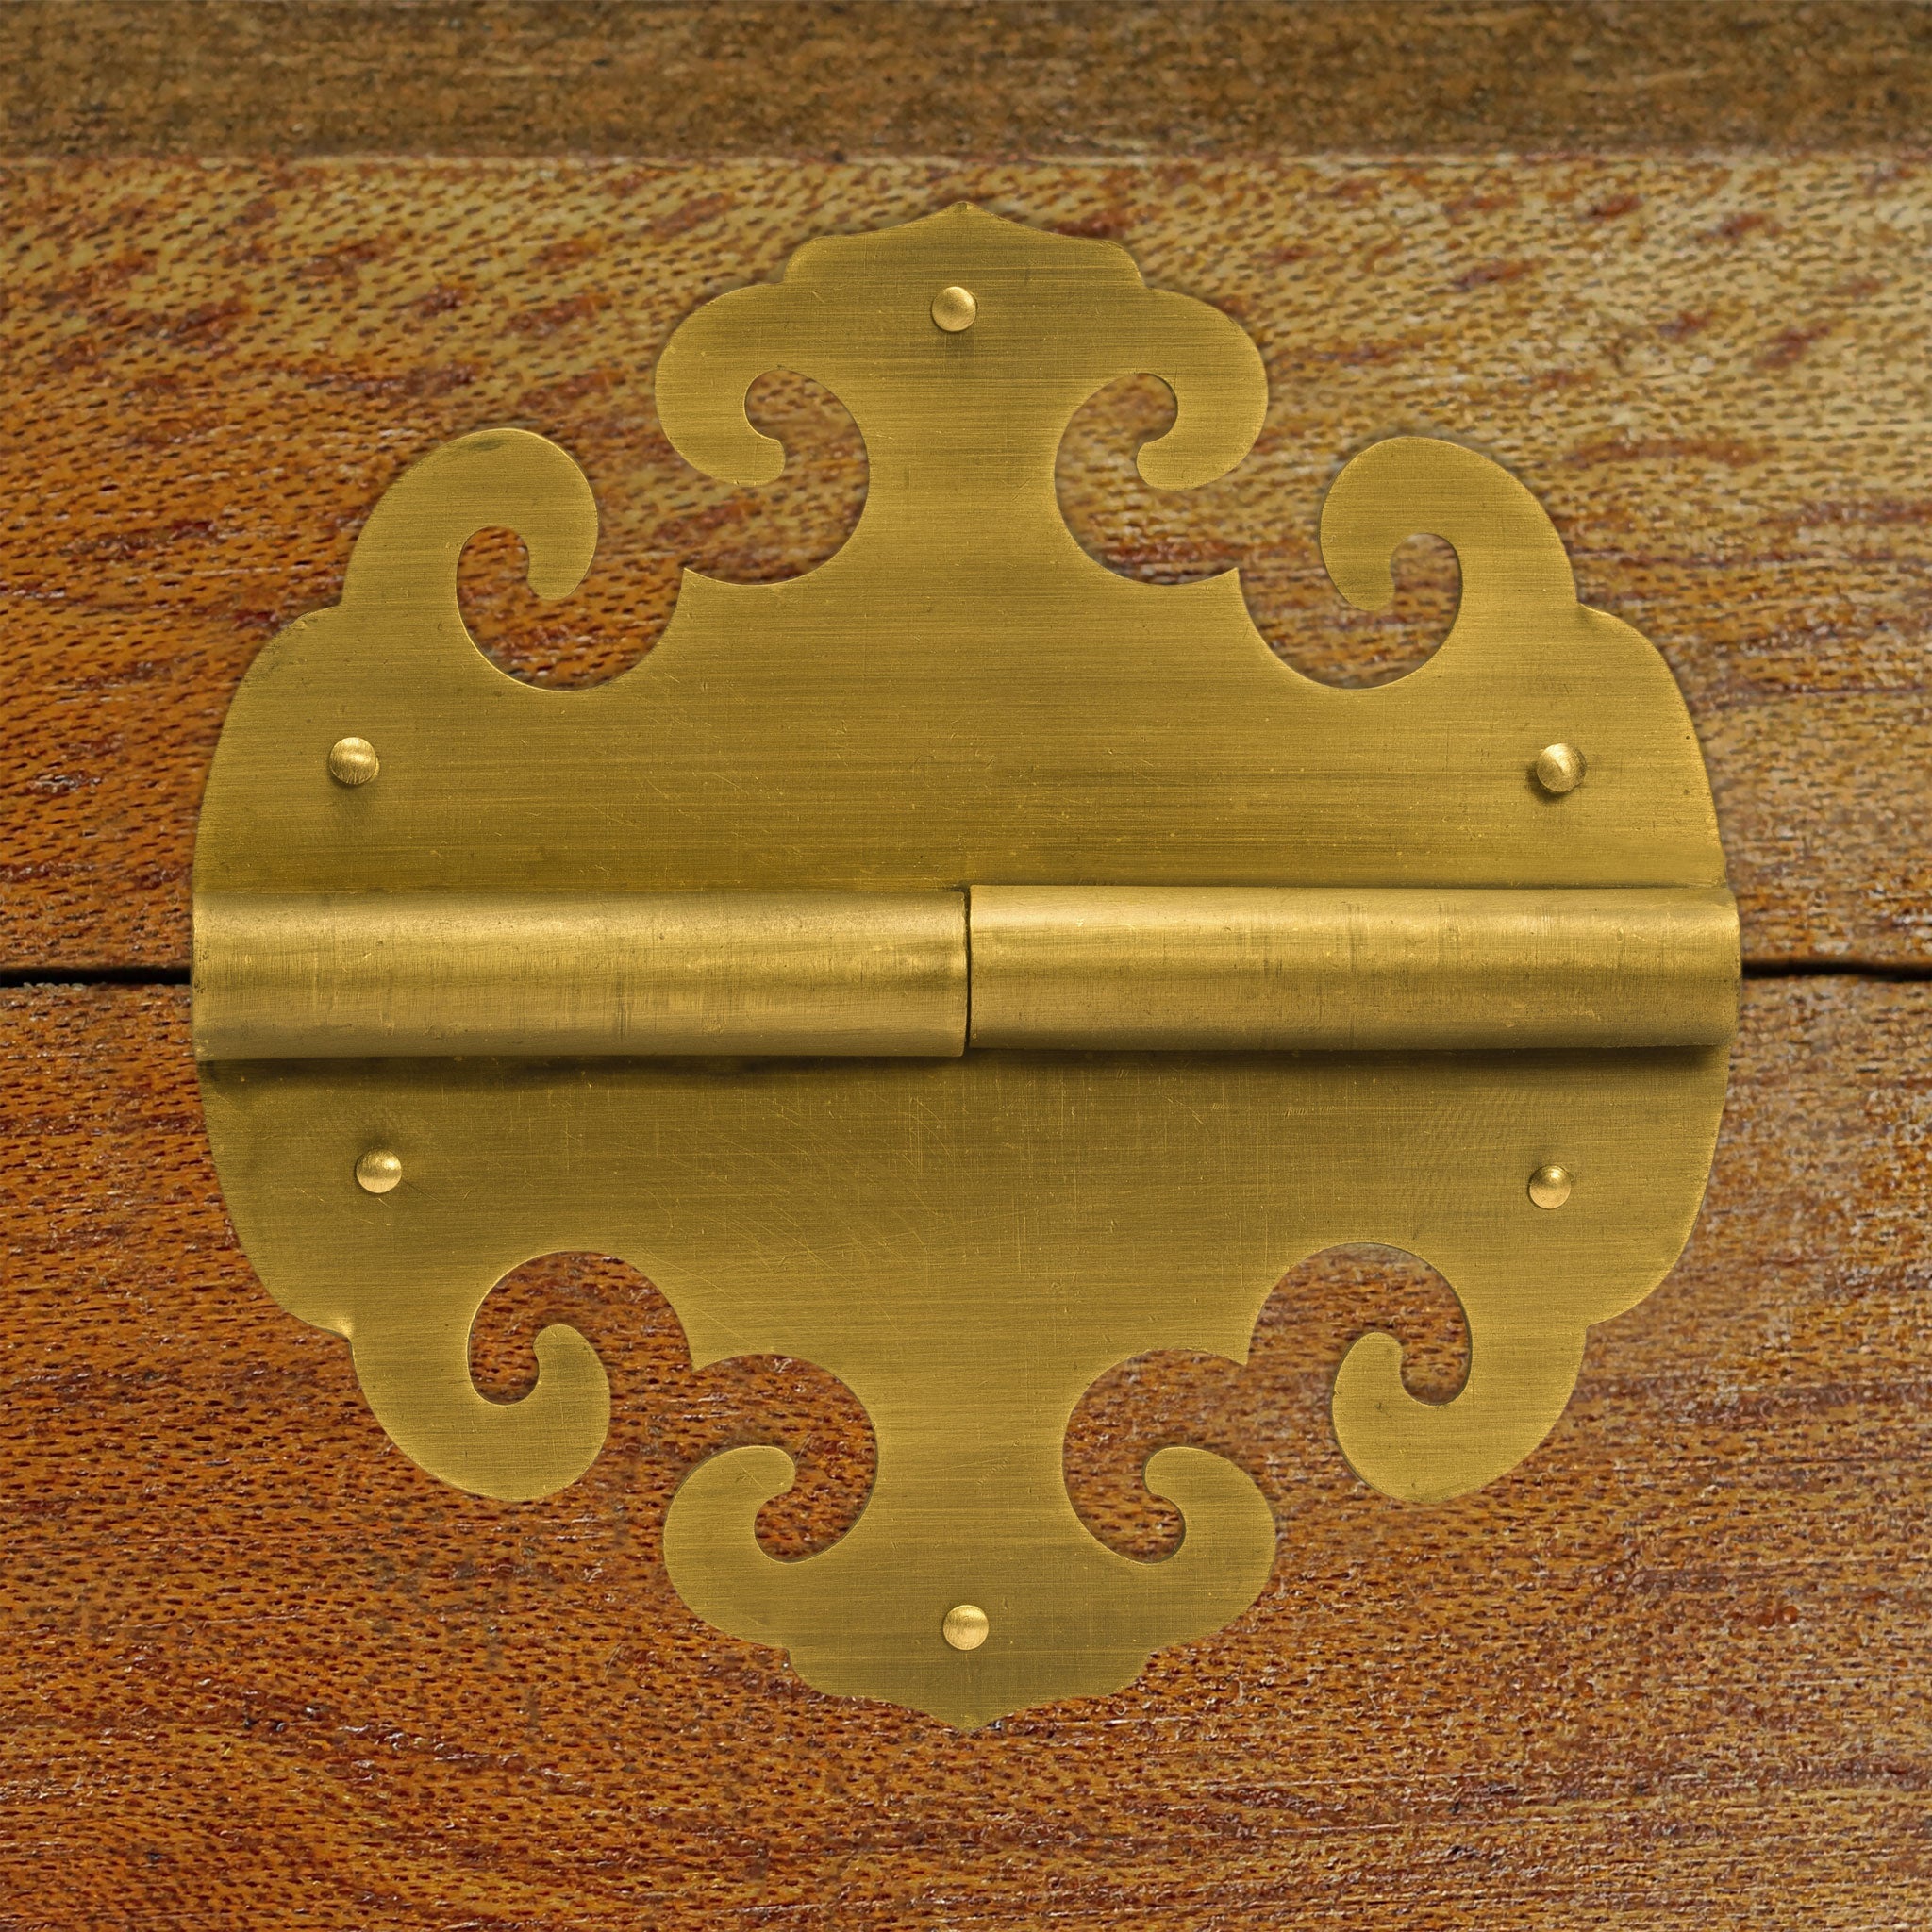 Four Flowers Hinges 4" - Set of 2-Chinese Brass Hardware